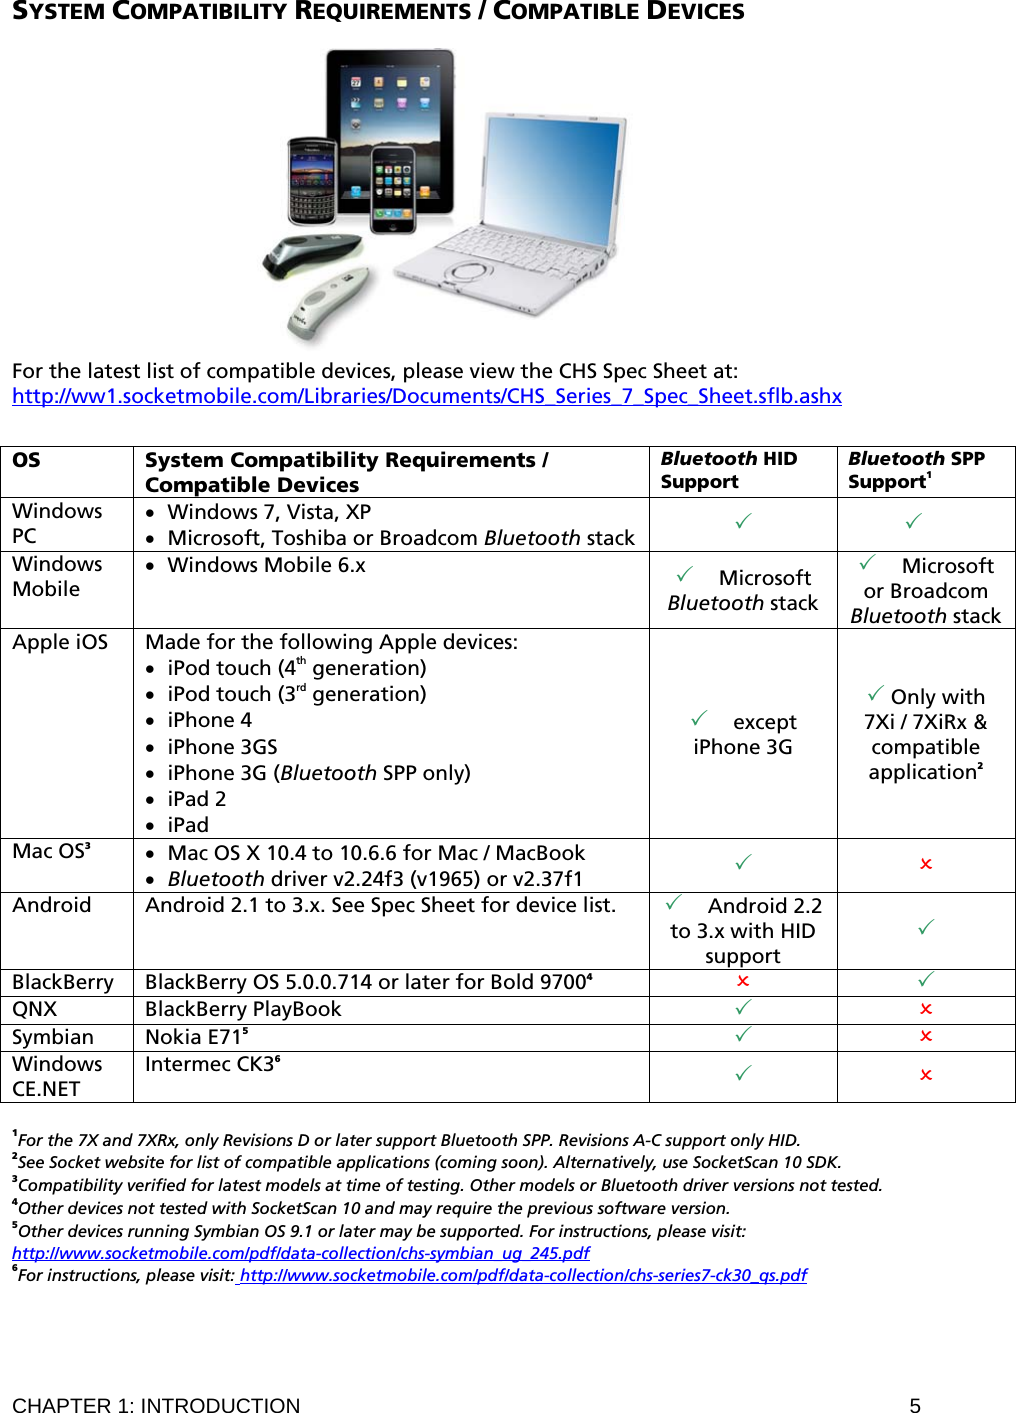 CHAPTER 1: INTRODUCTION  5 SYSTEM COMPATIBILITY REQUIREMENTS / COMPATIBLE DEVICES   For the latest list of compatible devices, please view the CHS Spec Sheet at: http://ww1.socketmobile.com/Libraries/Documents/CHS_Series_7_Spec_Sheet.sflb.ashx  OS  System Compatibility Requirements / Compatible Devices Bluetooth HID Support Bluetooth SPP Support1 Windows PC • Windows 7, Vista, XP • Microsoft, Toshiba or Broadcom Bluetooth stack     Windows Mobile • Windows Mobile 6.x   Microsoft Bluetooth stack  Microsoft or Broadcom  Bluetooth stack Apple iOS  Made for the following Apple devices: • iPod touch (4th generation) • iPod touch (3rd generation) • iPhone 4 • iPhone 3GS • iPhone 3G (Bluetooth SPP only) • iPad 2 • iPad  except iPhone 3G  Only with 7Xi / 7XiRx &amp; compatible application2 Mac OS3 • Mac OS X 10.4 to 10.6.6 for Mac / MacBook • Bluetooth driver v2.24f3 (v1965) or v2.37f1    Android  Android 2.1 to 3.x. See Spec Sheet for device list.    Android 2.2 to 3.x with HID support  BlackBerry   BlackBerry OS 5.0.0.714 or later for Bold 97004   QNX BlackBerry PlayBook    Symbian   Nokia E715   Windows CE.NET Intermec CK36    1For the 7X and 7XRx, only Revisions D or later support Bluetooth SPP. Revisions A-C support only HID. 2See Socket website for list of compatible applications (coming soon). Alternatively, use SocketScan 10 SDK. 3Compatibility verified for latest models at time of testing. Other models or Bluetooth driver versions not tested. 4Other devices not tested with SocketScan 10 and may require the previous software version. 5Other devices running Symbian OS 9.1 or later may be supported. For instructions, please visit: http://www.socketmobile.com/pdf/data-collection/chs-symbian_ug_245.pdf 6For instructions, please visit: http://www.socketmobile.com/pdf/data-collection/chs-series7-ck30_qs.pdf  